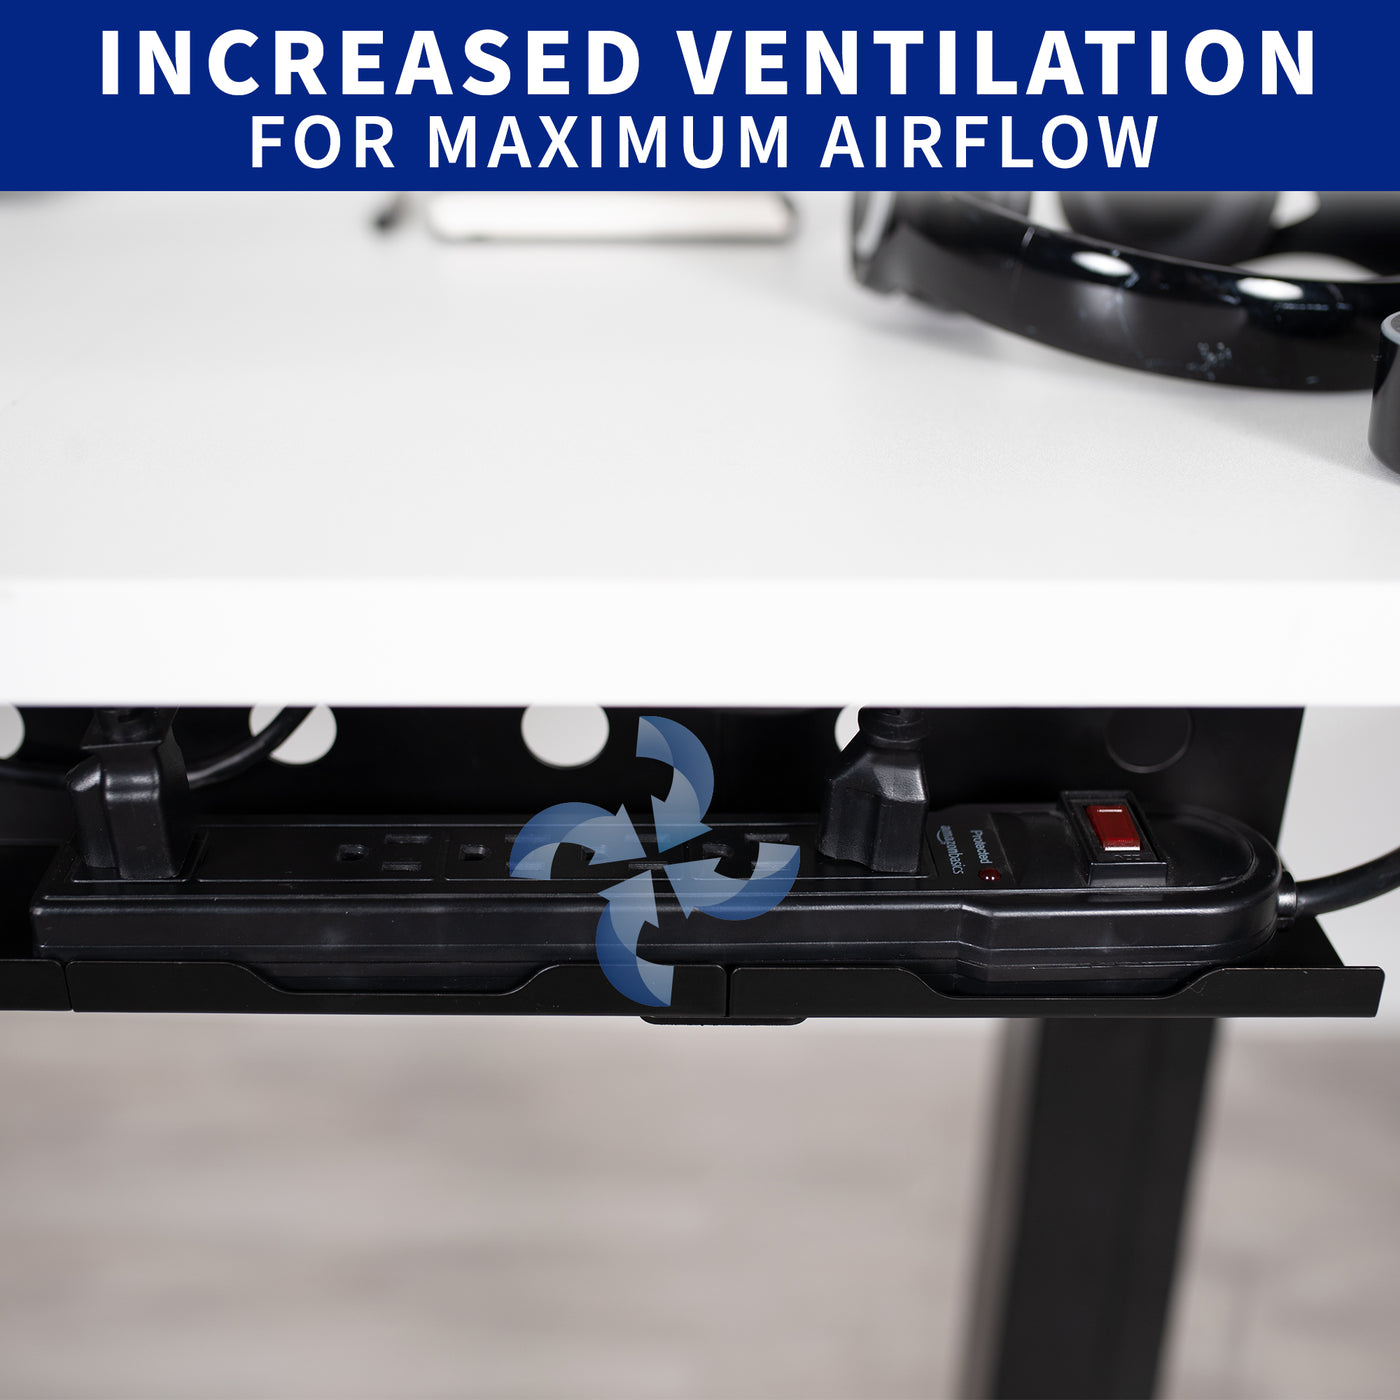 Increase ventilation and airflow to cool off power strips and warm office equipment.